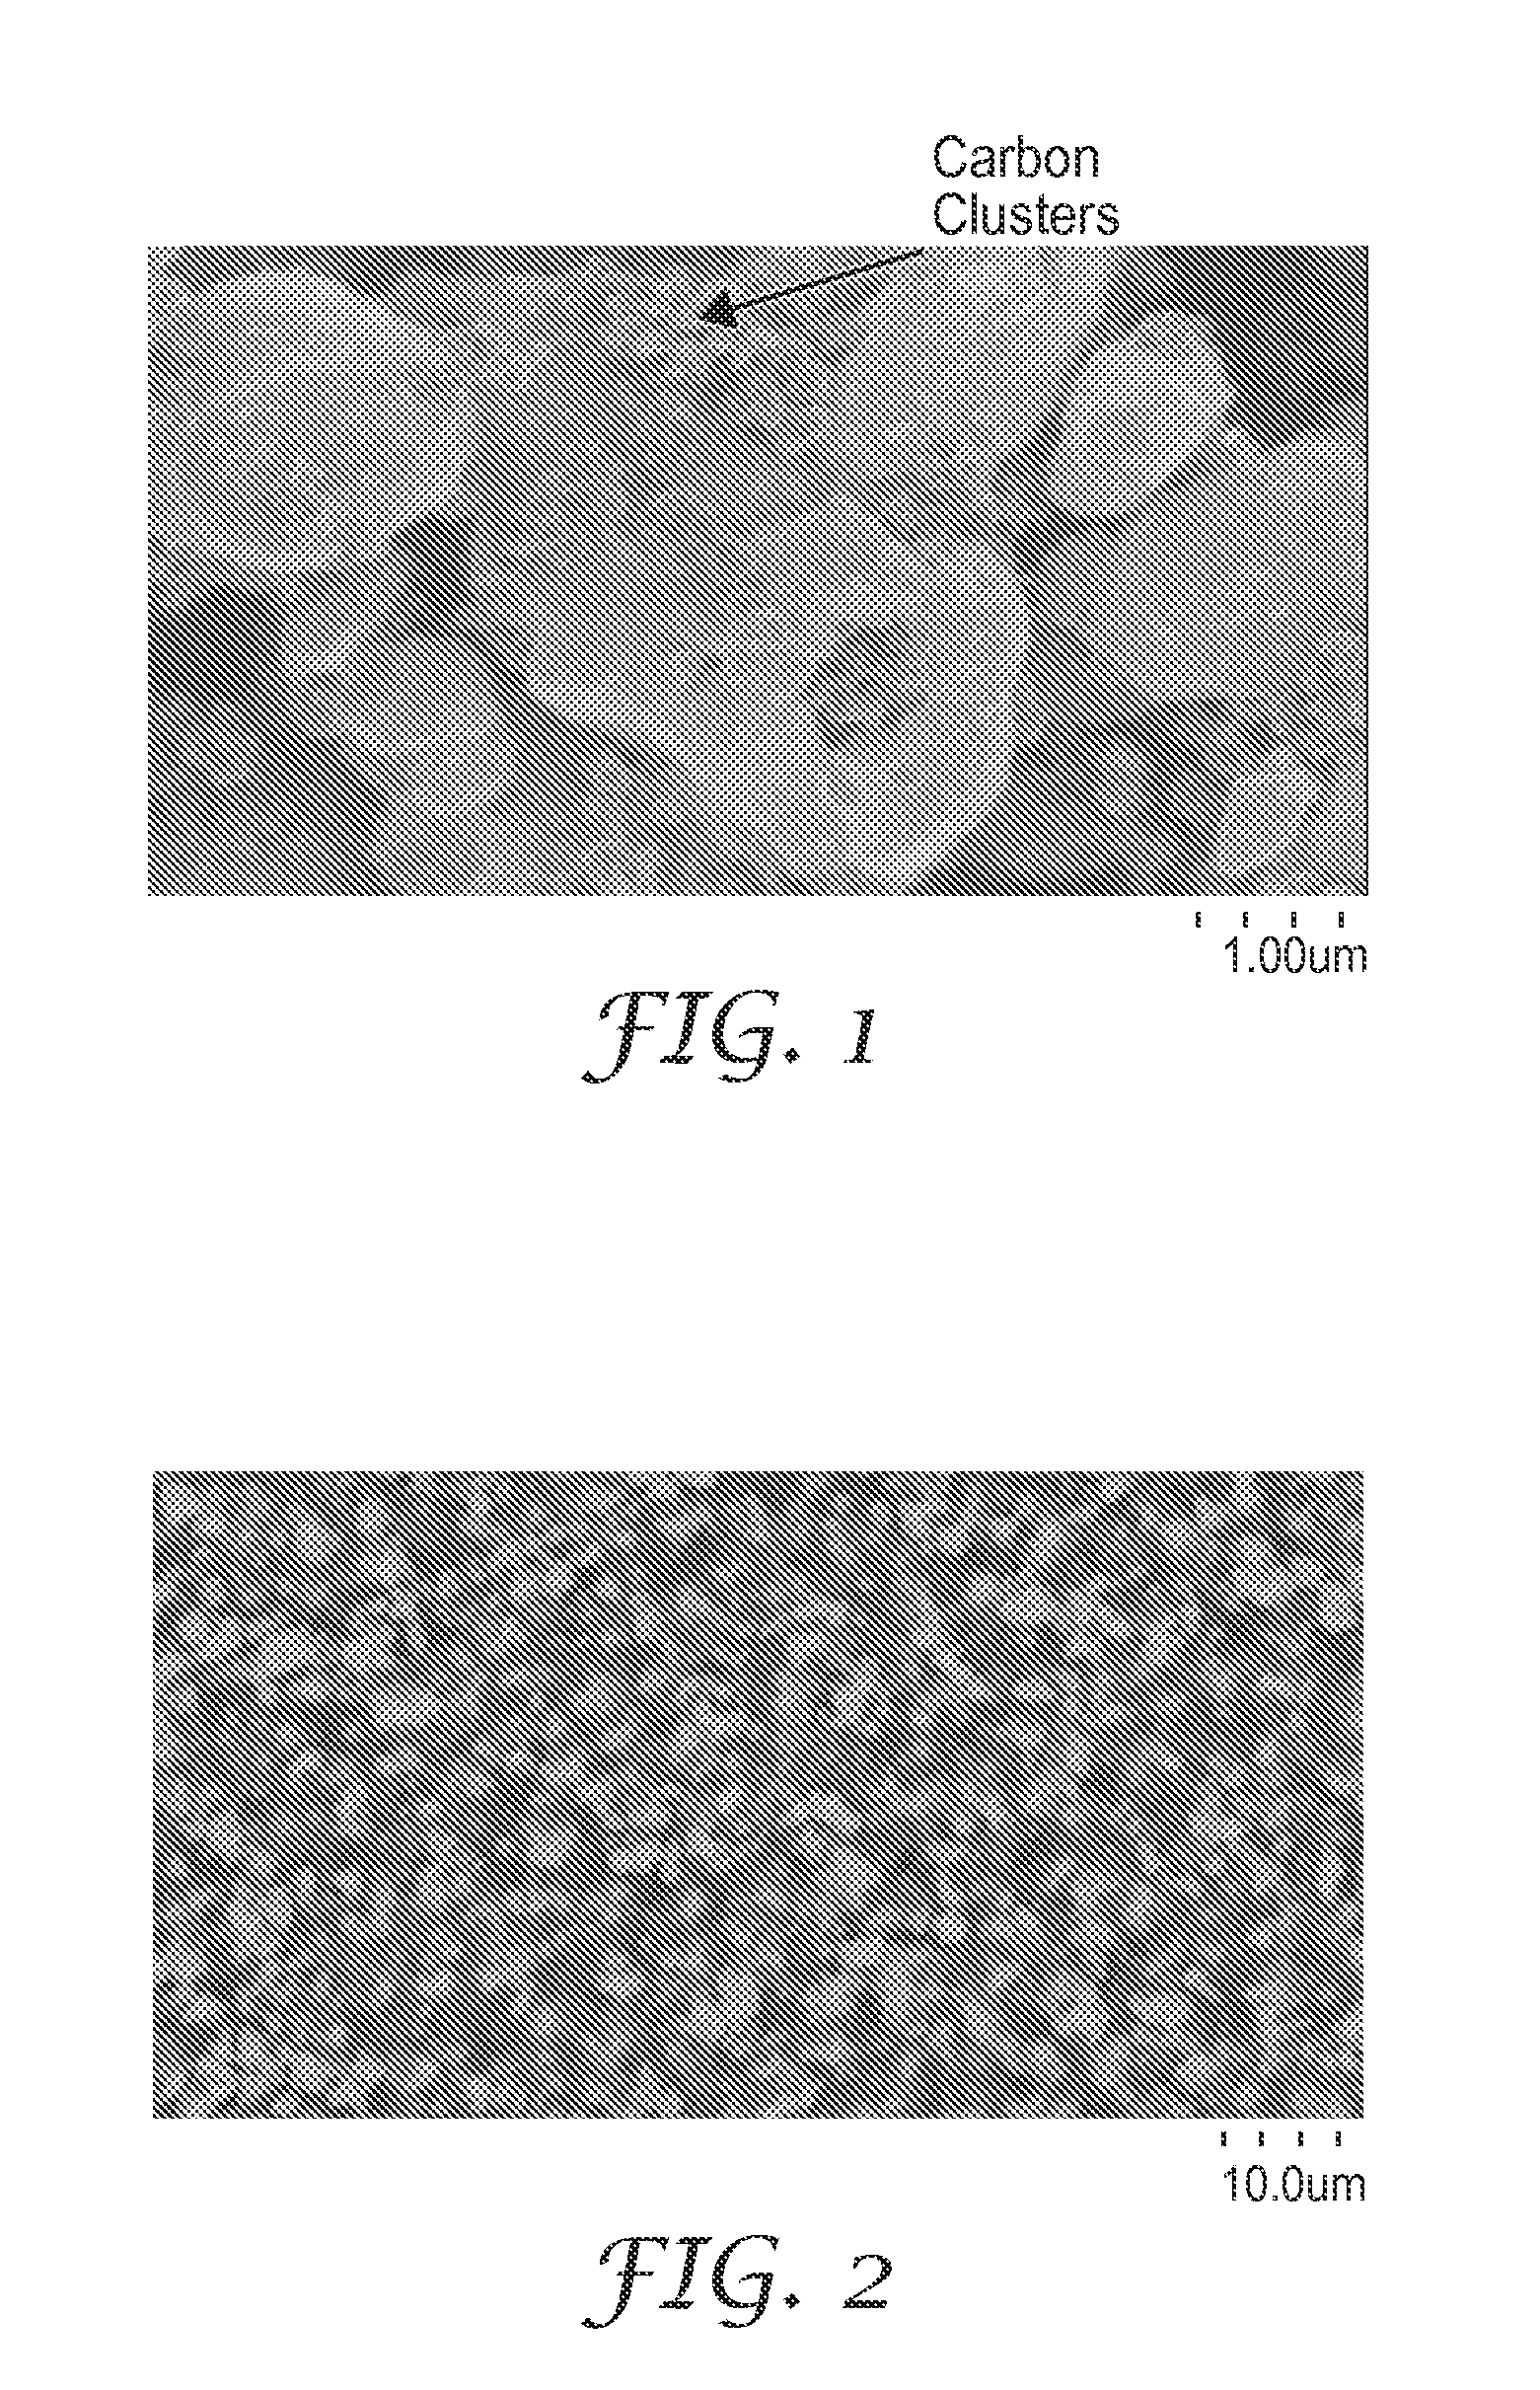 Dielectric material with non-linear dielectric constant